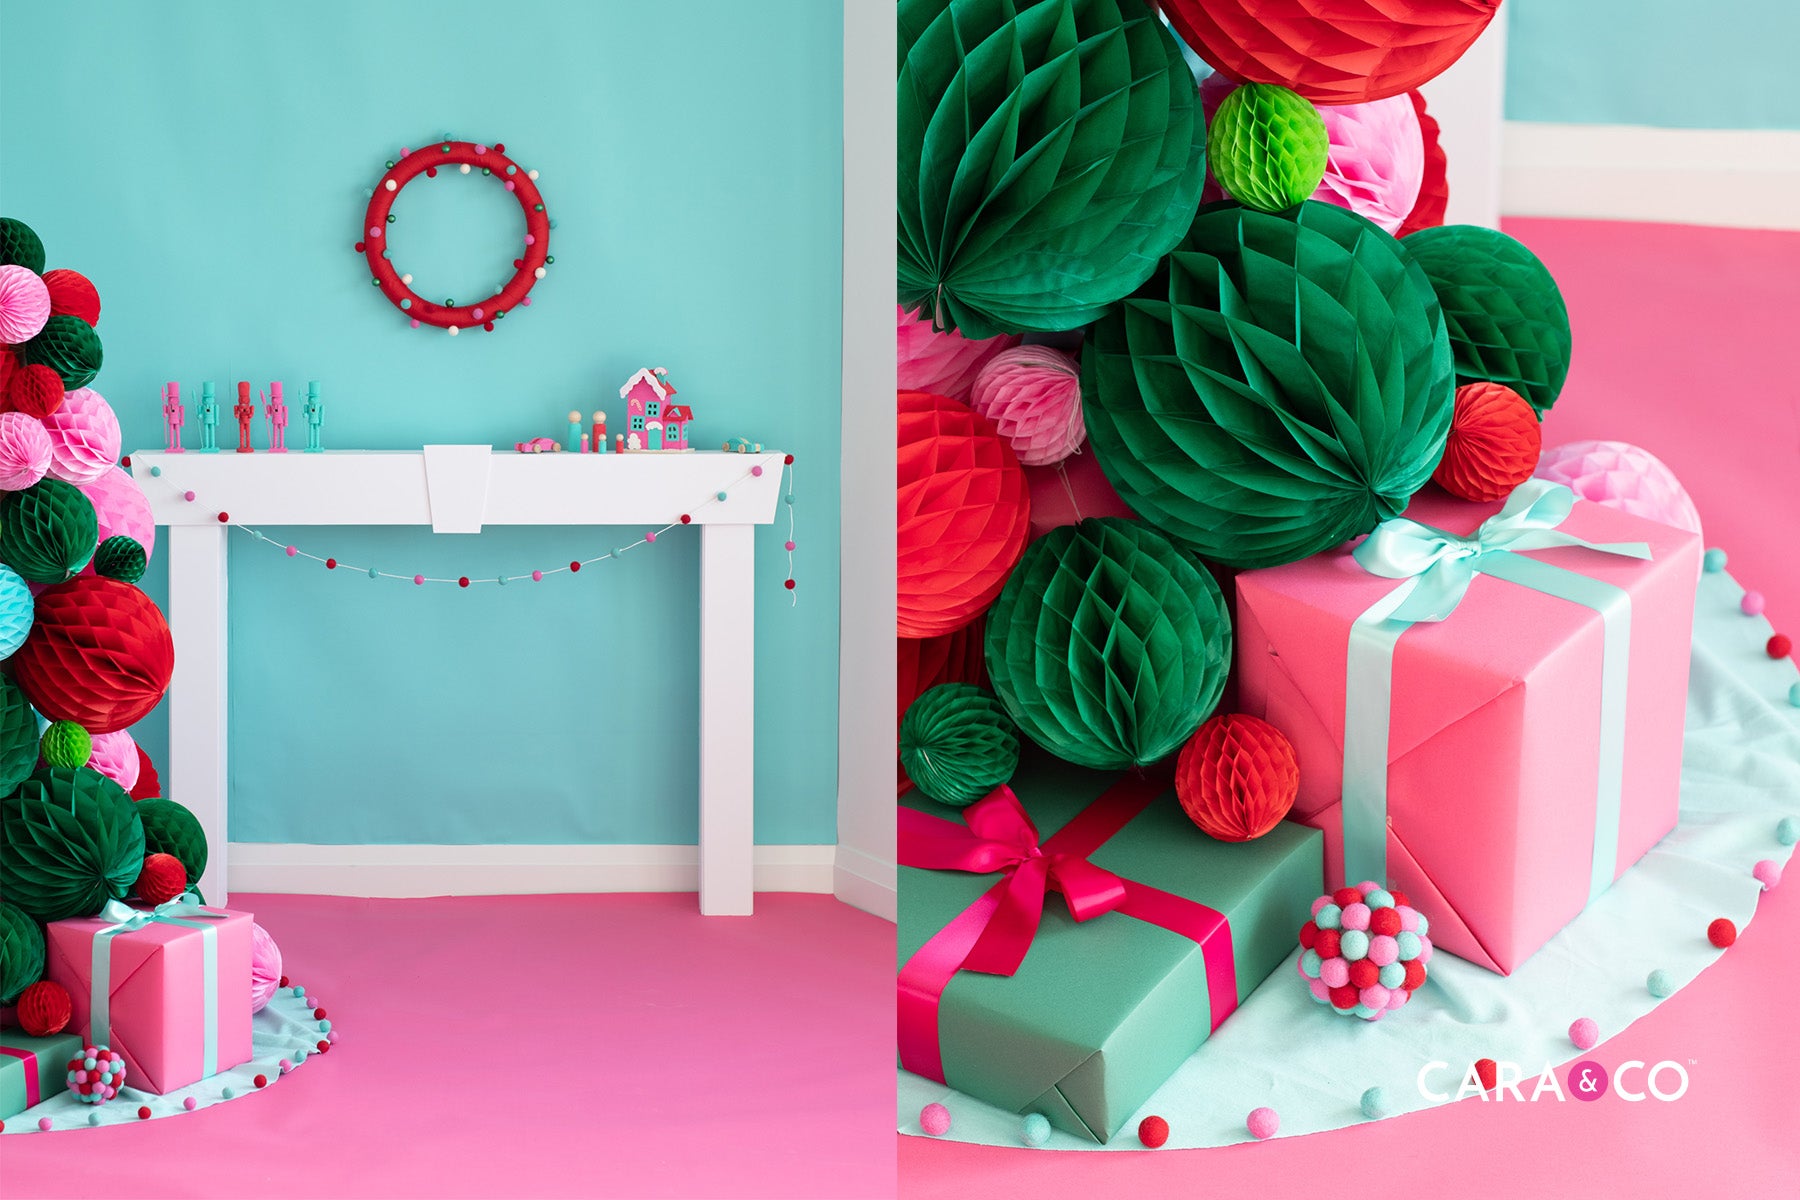 Christmas Crafting in Color - Colorful Christmas Inspiration - Cara & Co Blog